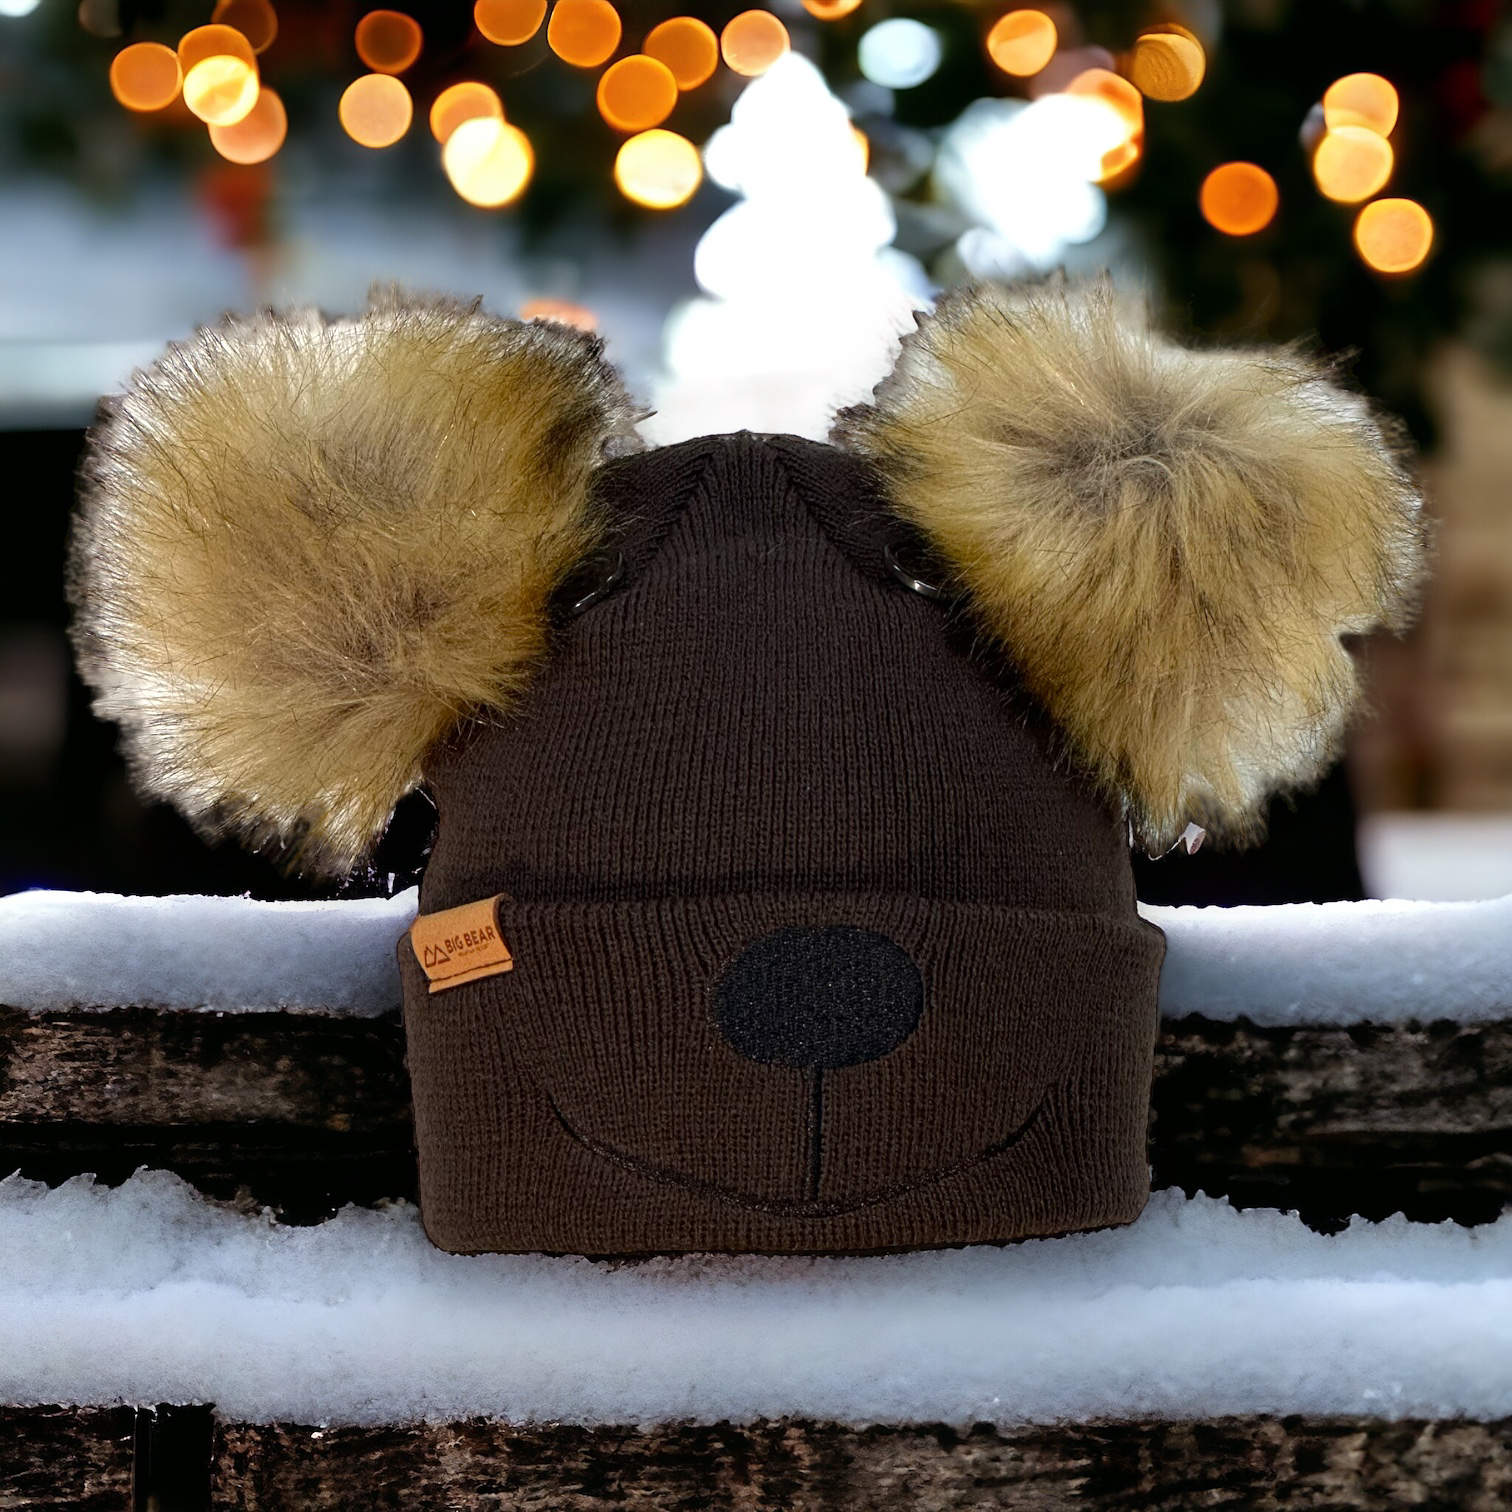 Beanie with nose and mouth stitching on cuff of beanie.  Two buttons as eye on crown of beanie.  Two fur pom poms on either side of top as ears and a BBMR patch on cuff.